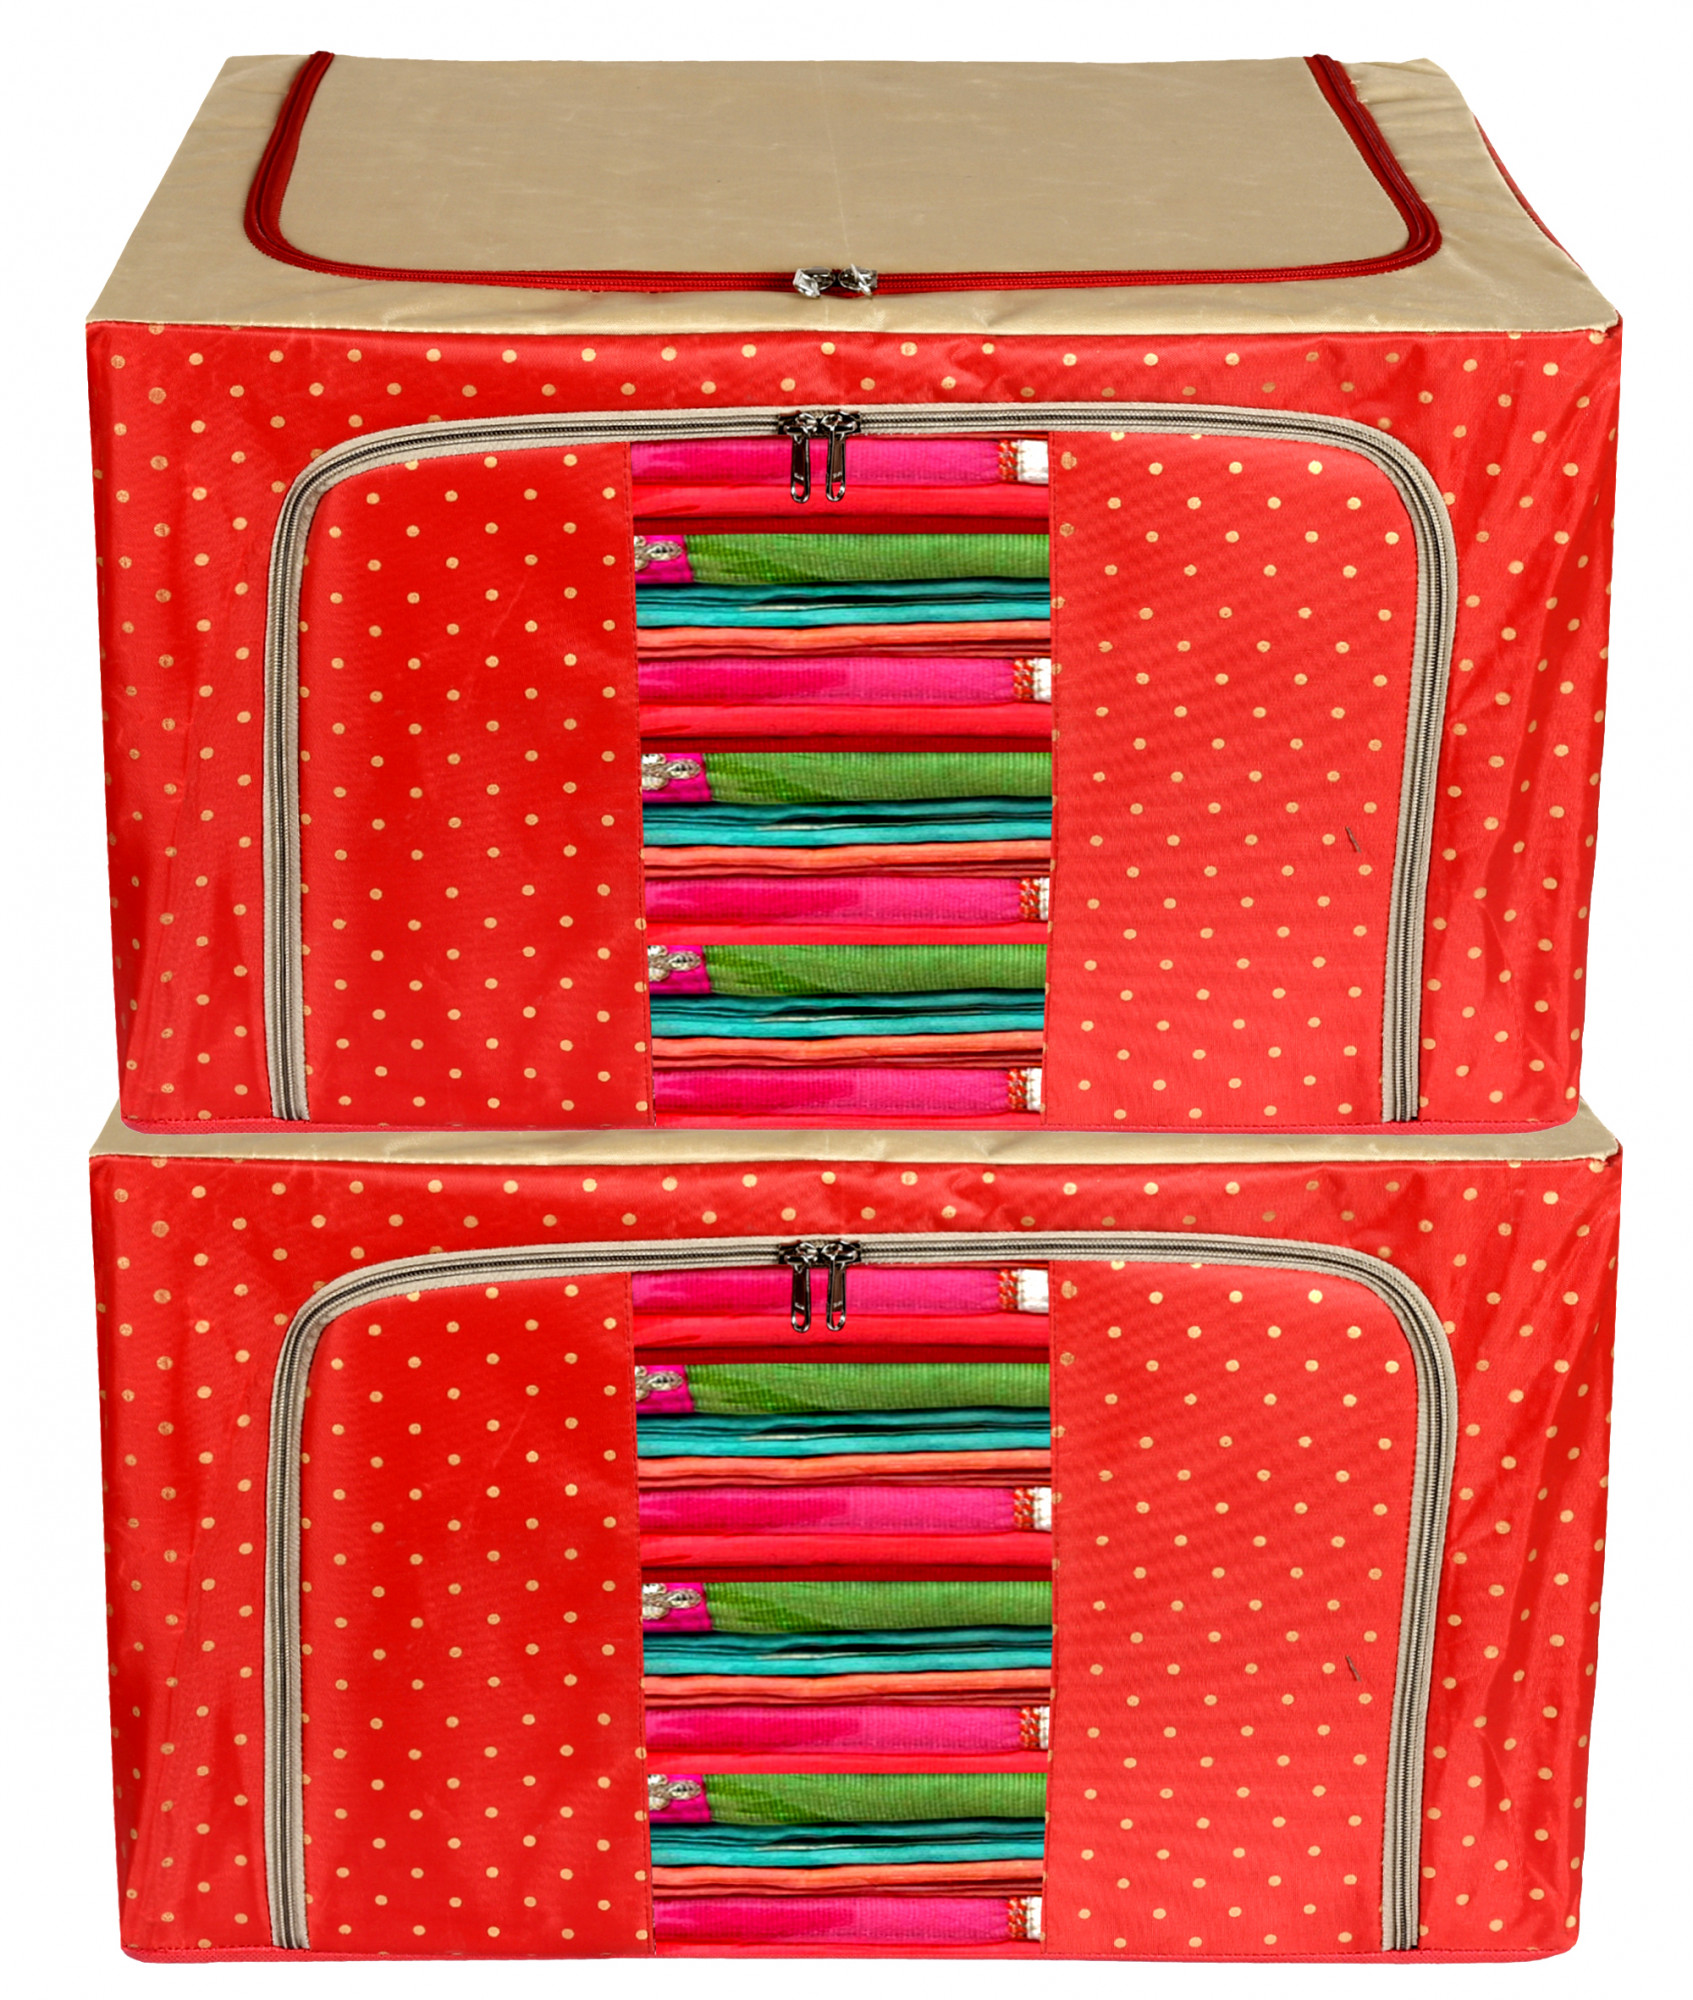 Kuber Industries Dot Printed Steel Frame Storage Box/Organizer For Clothing, Blankets, Bedding With Clear Window, 24Ltr. (Red & Brown)-44KM0213